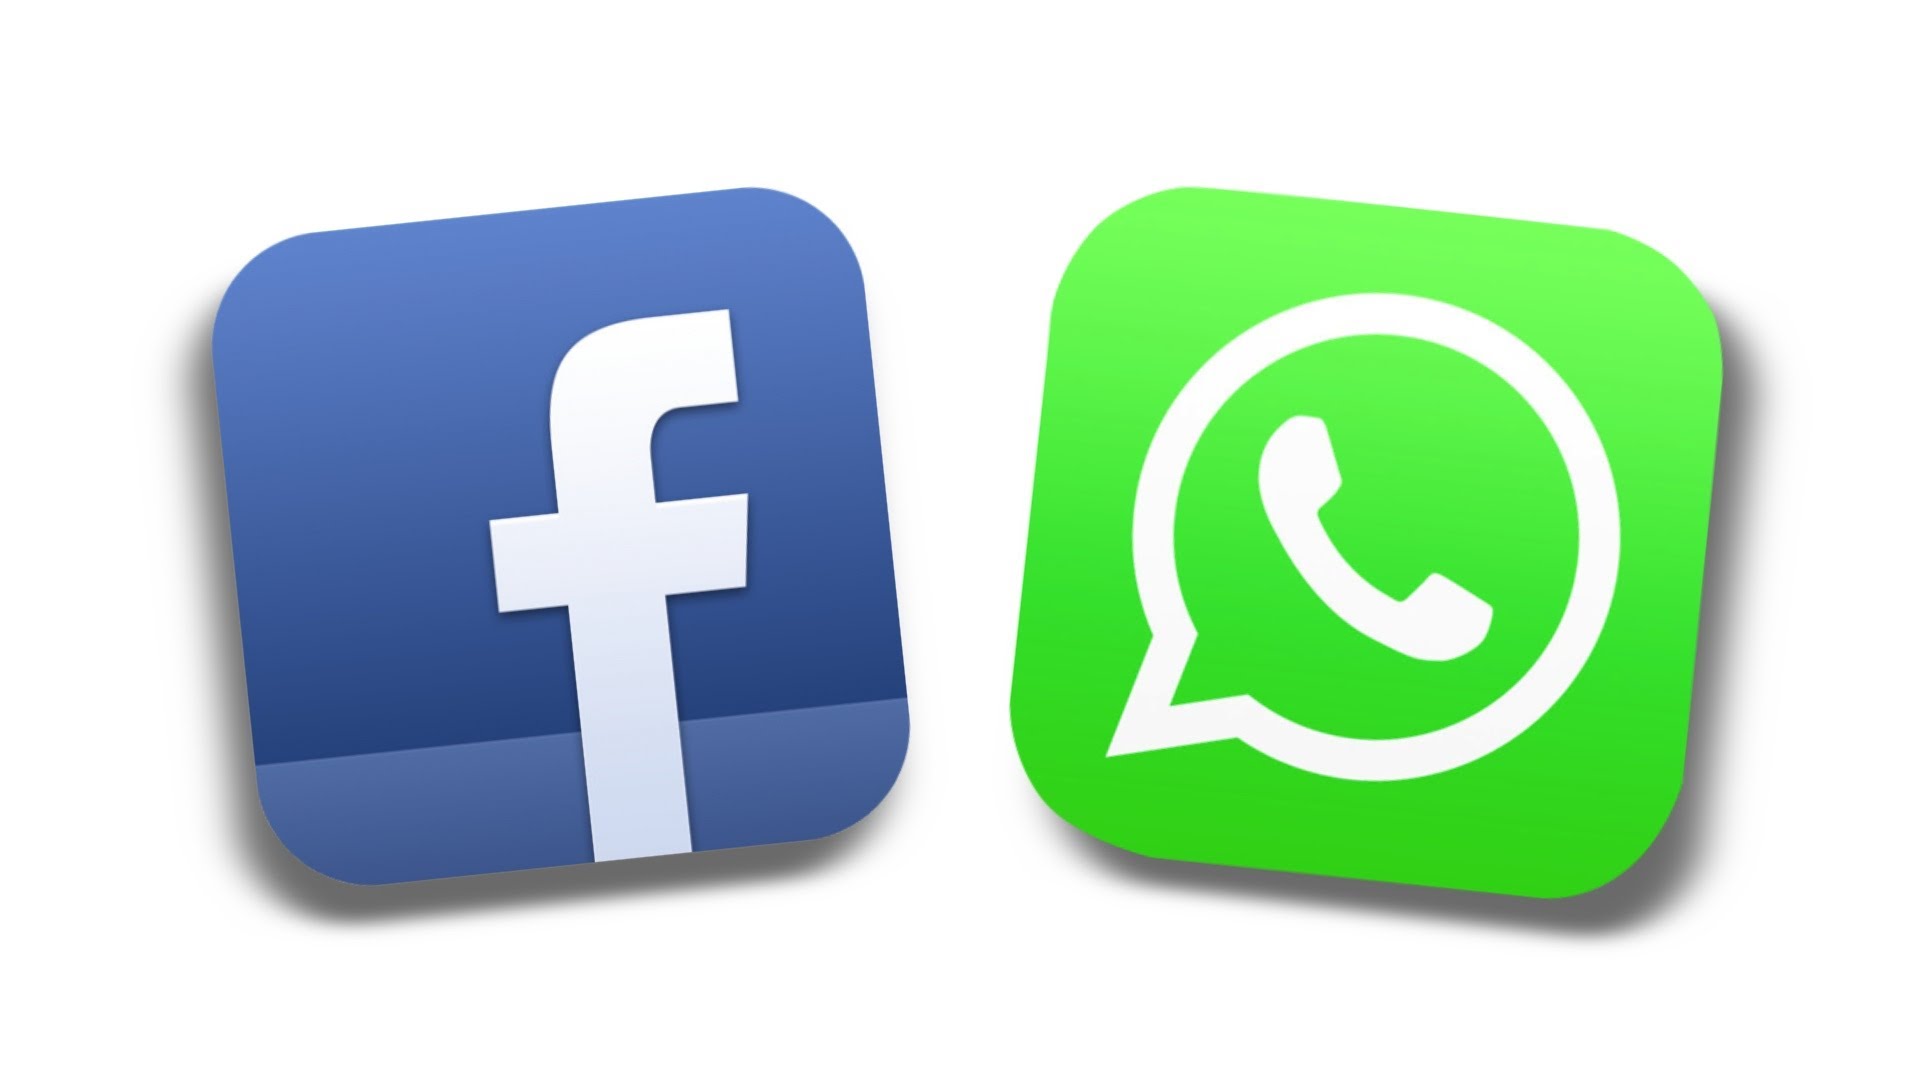 WhatsApp will force you to share your data with Facebook - GizChina.it